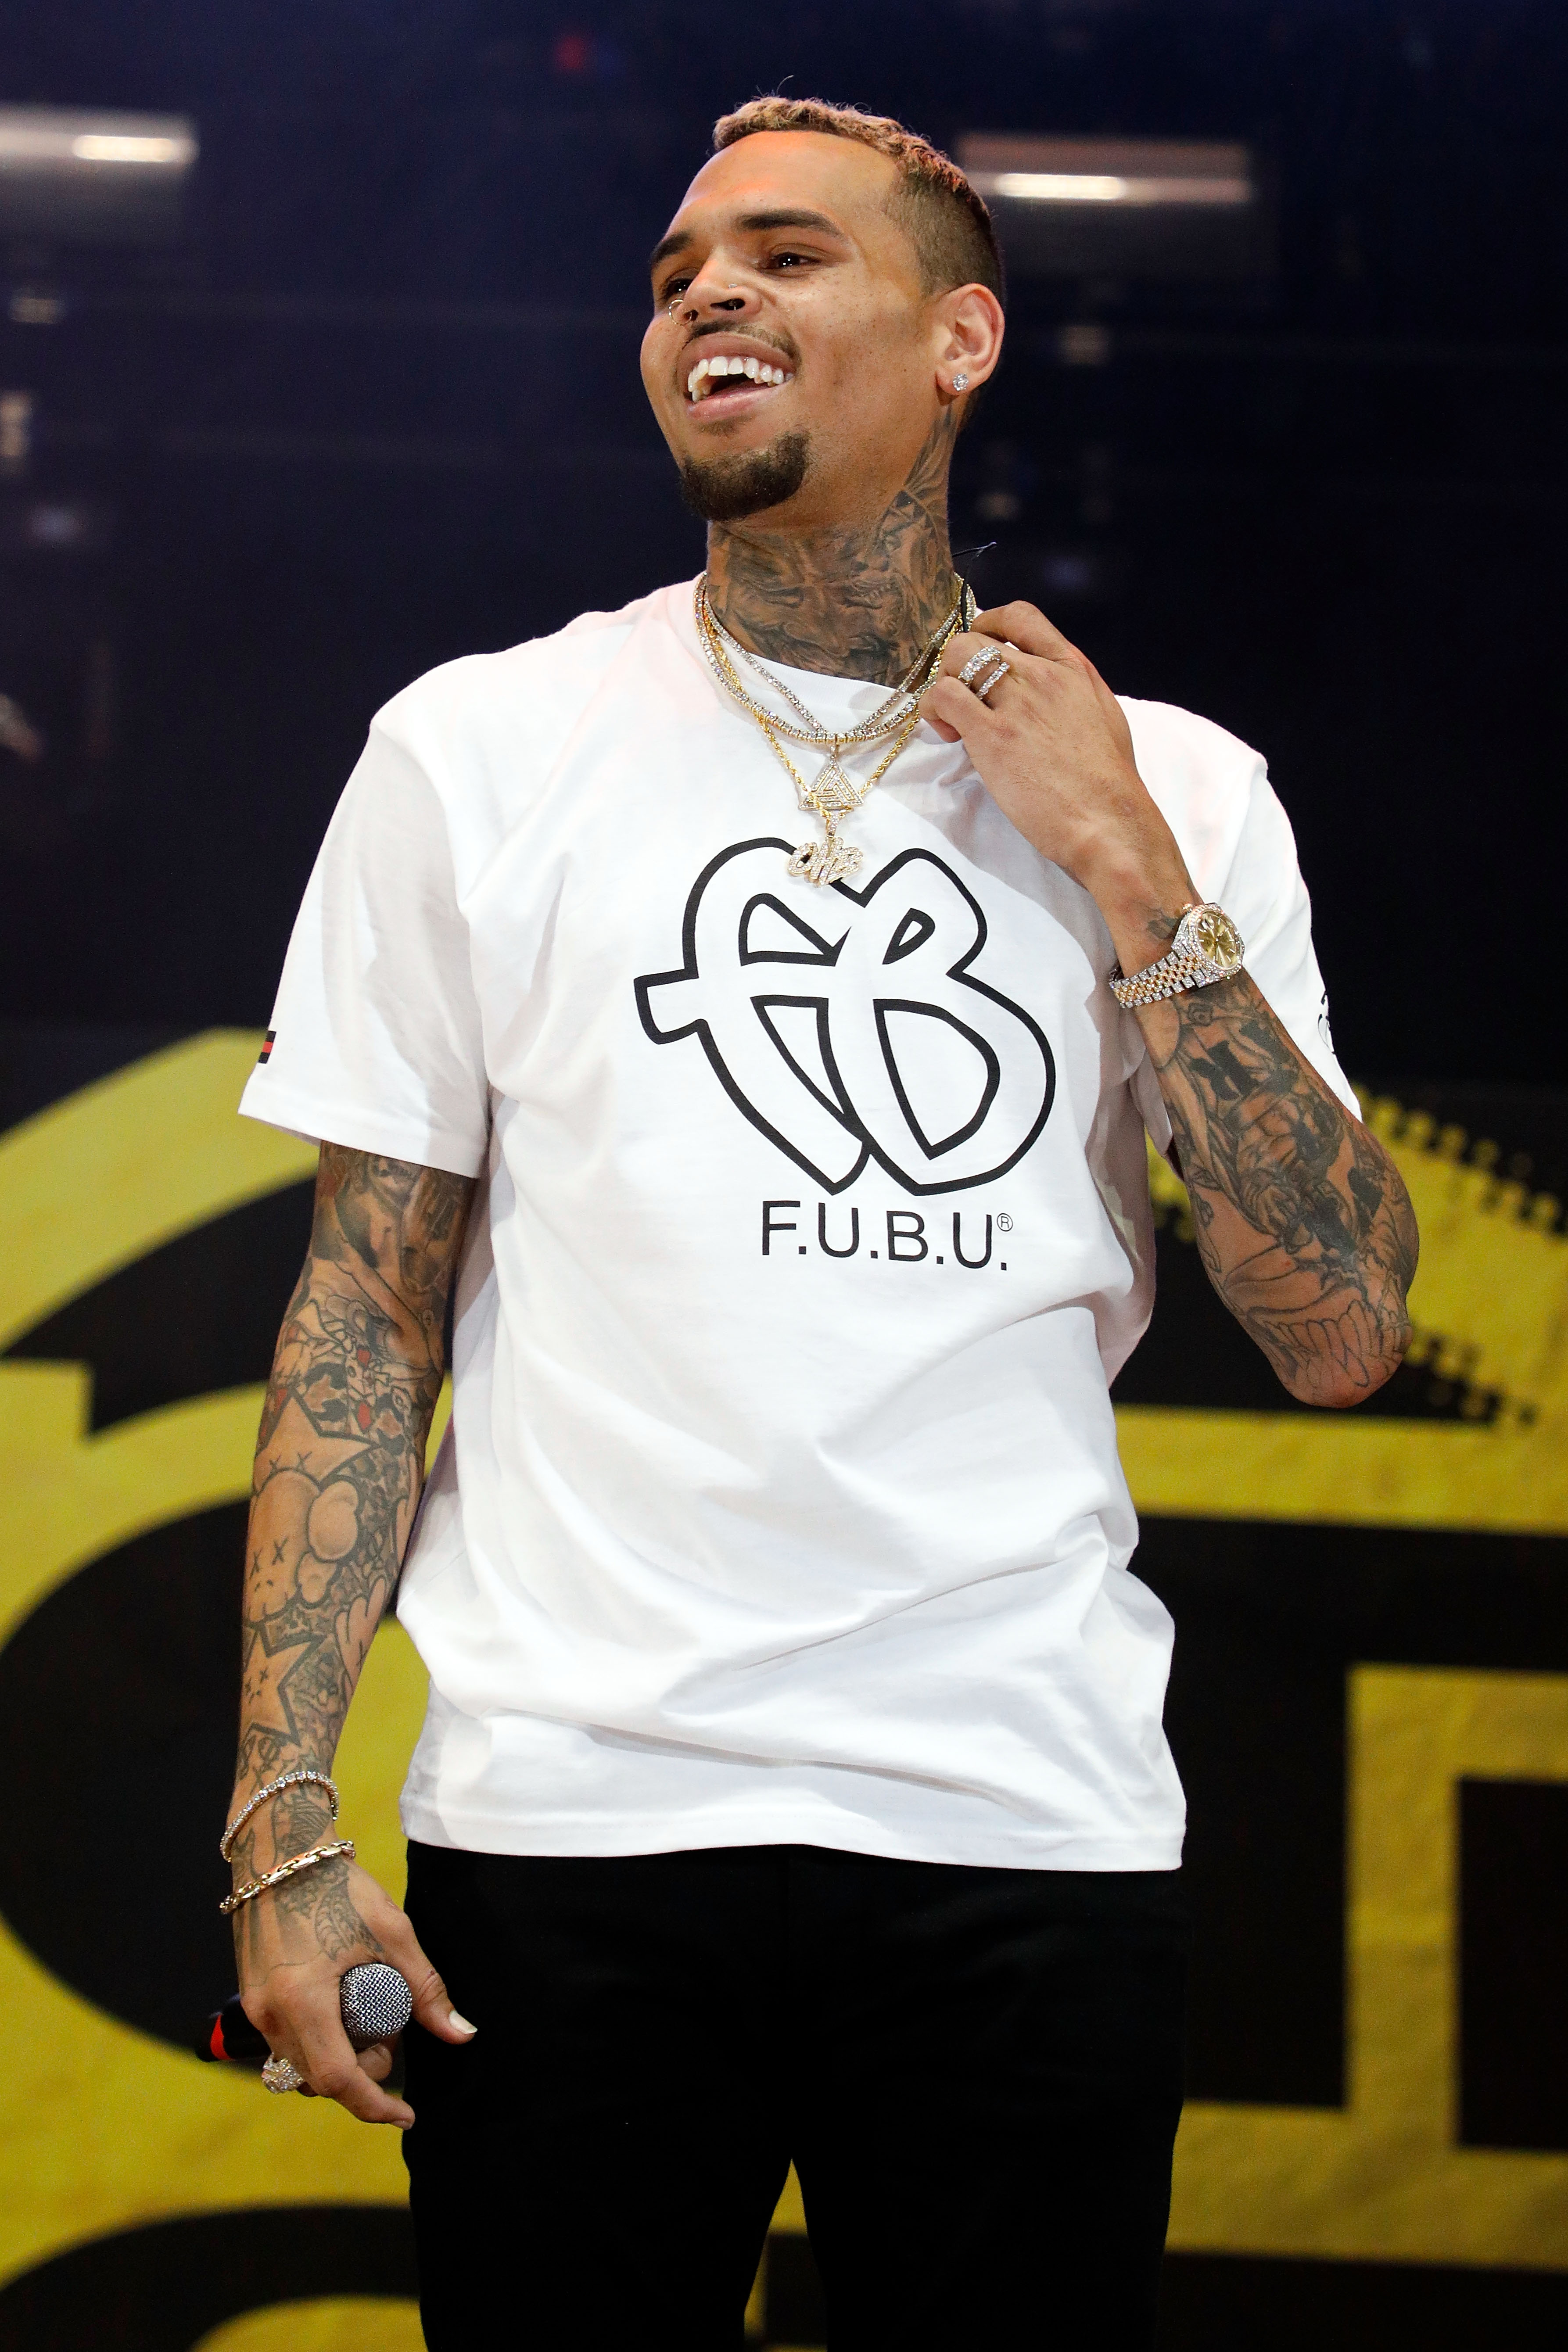 Chris Brown performs during the 2017 Hot 97 Summer Jam at MetLife Stadium on June 11, 2017 | Photo: Getty Images